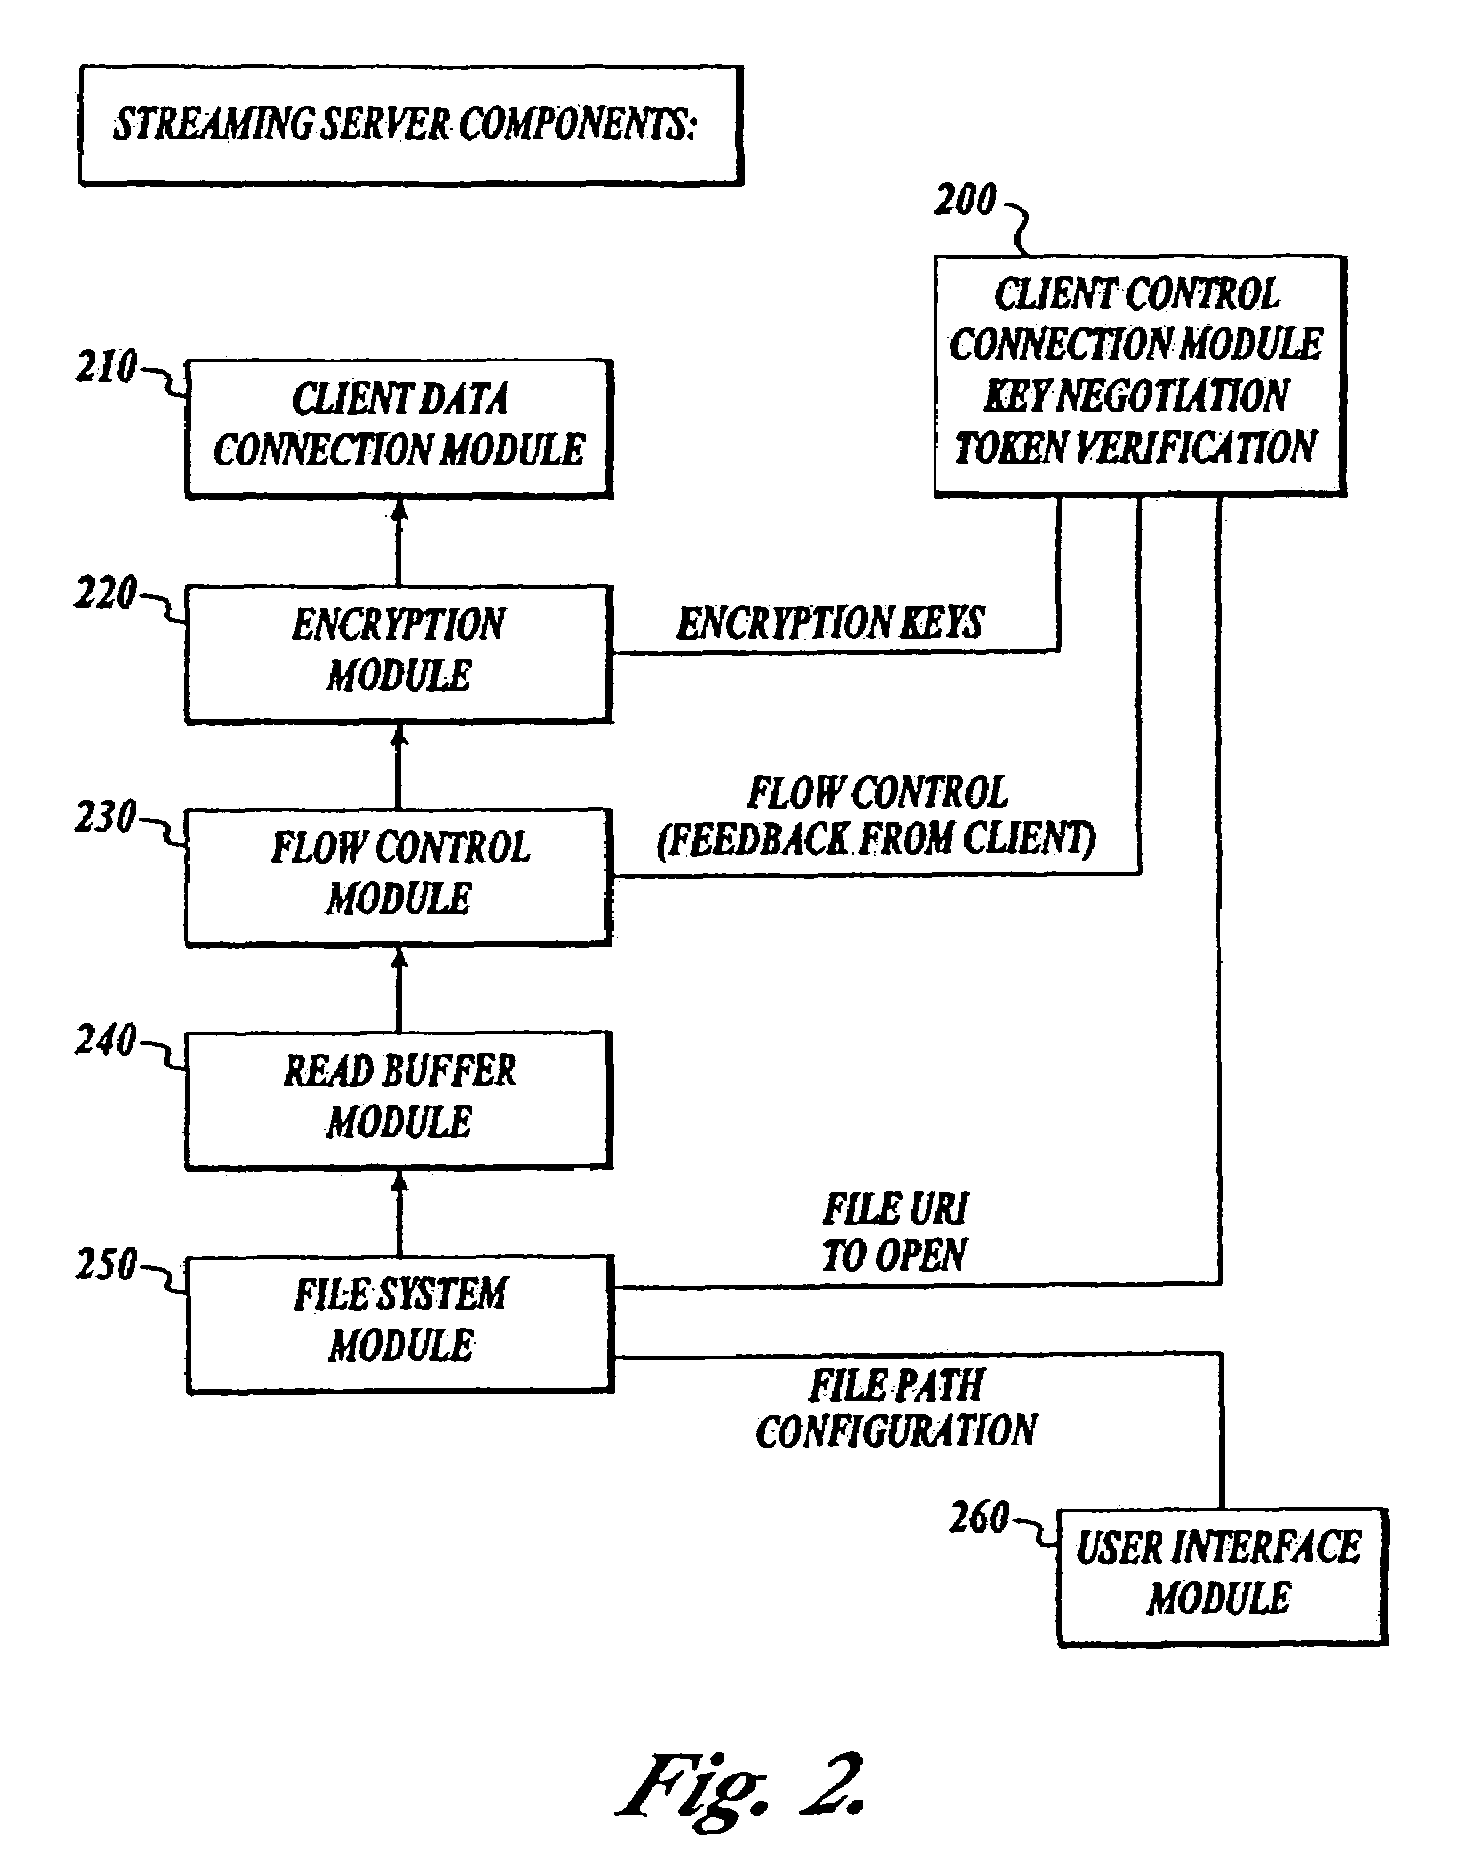 Process and streaming server for encrypting a data stream to a virtual smart card client system